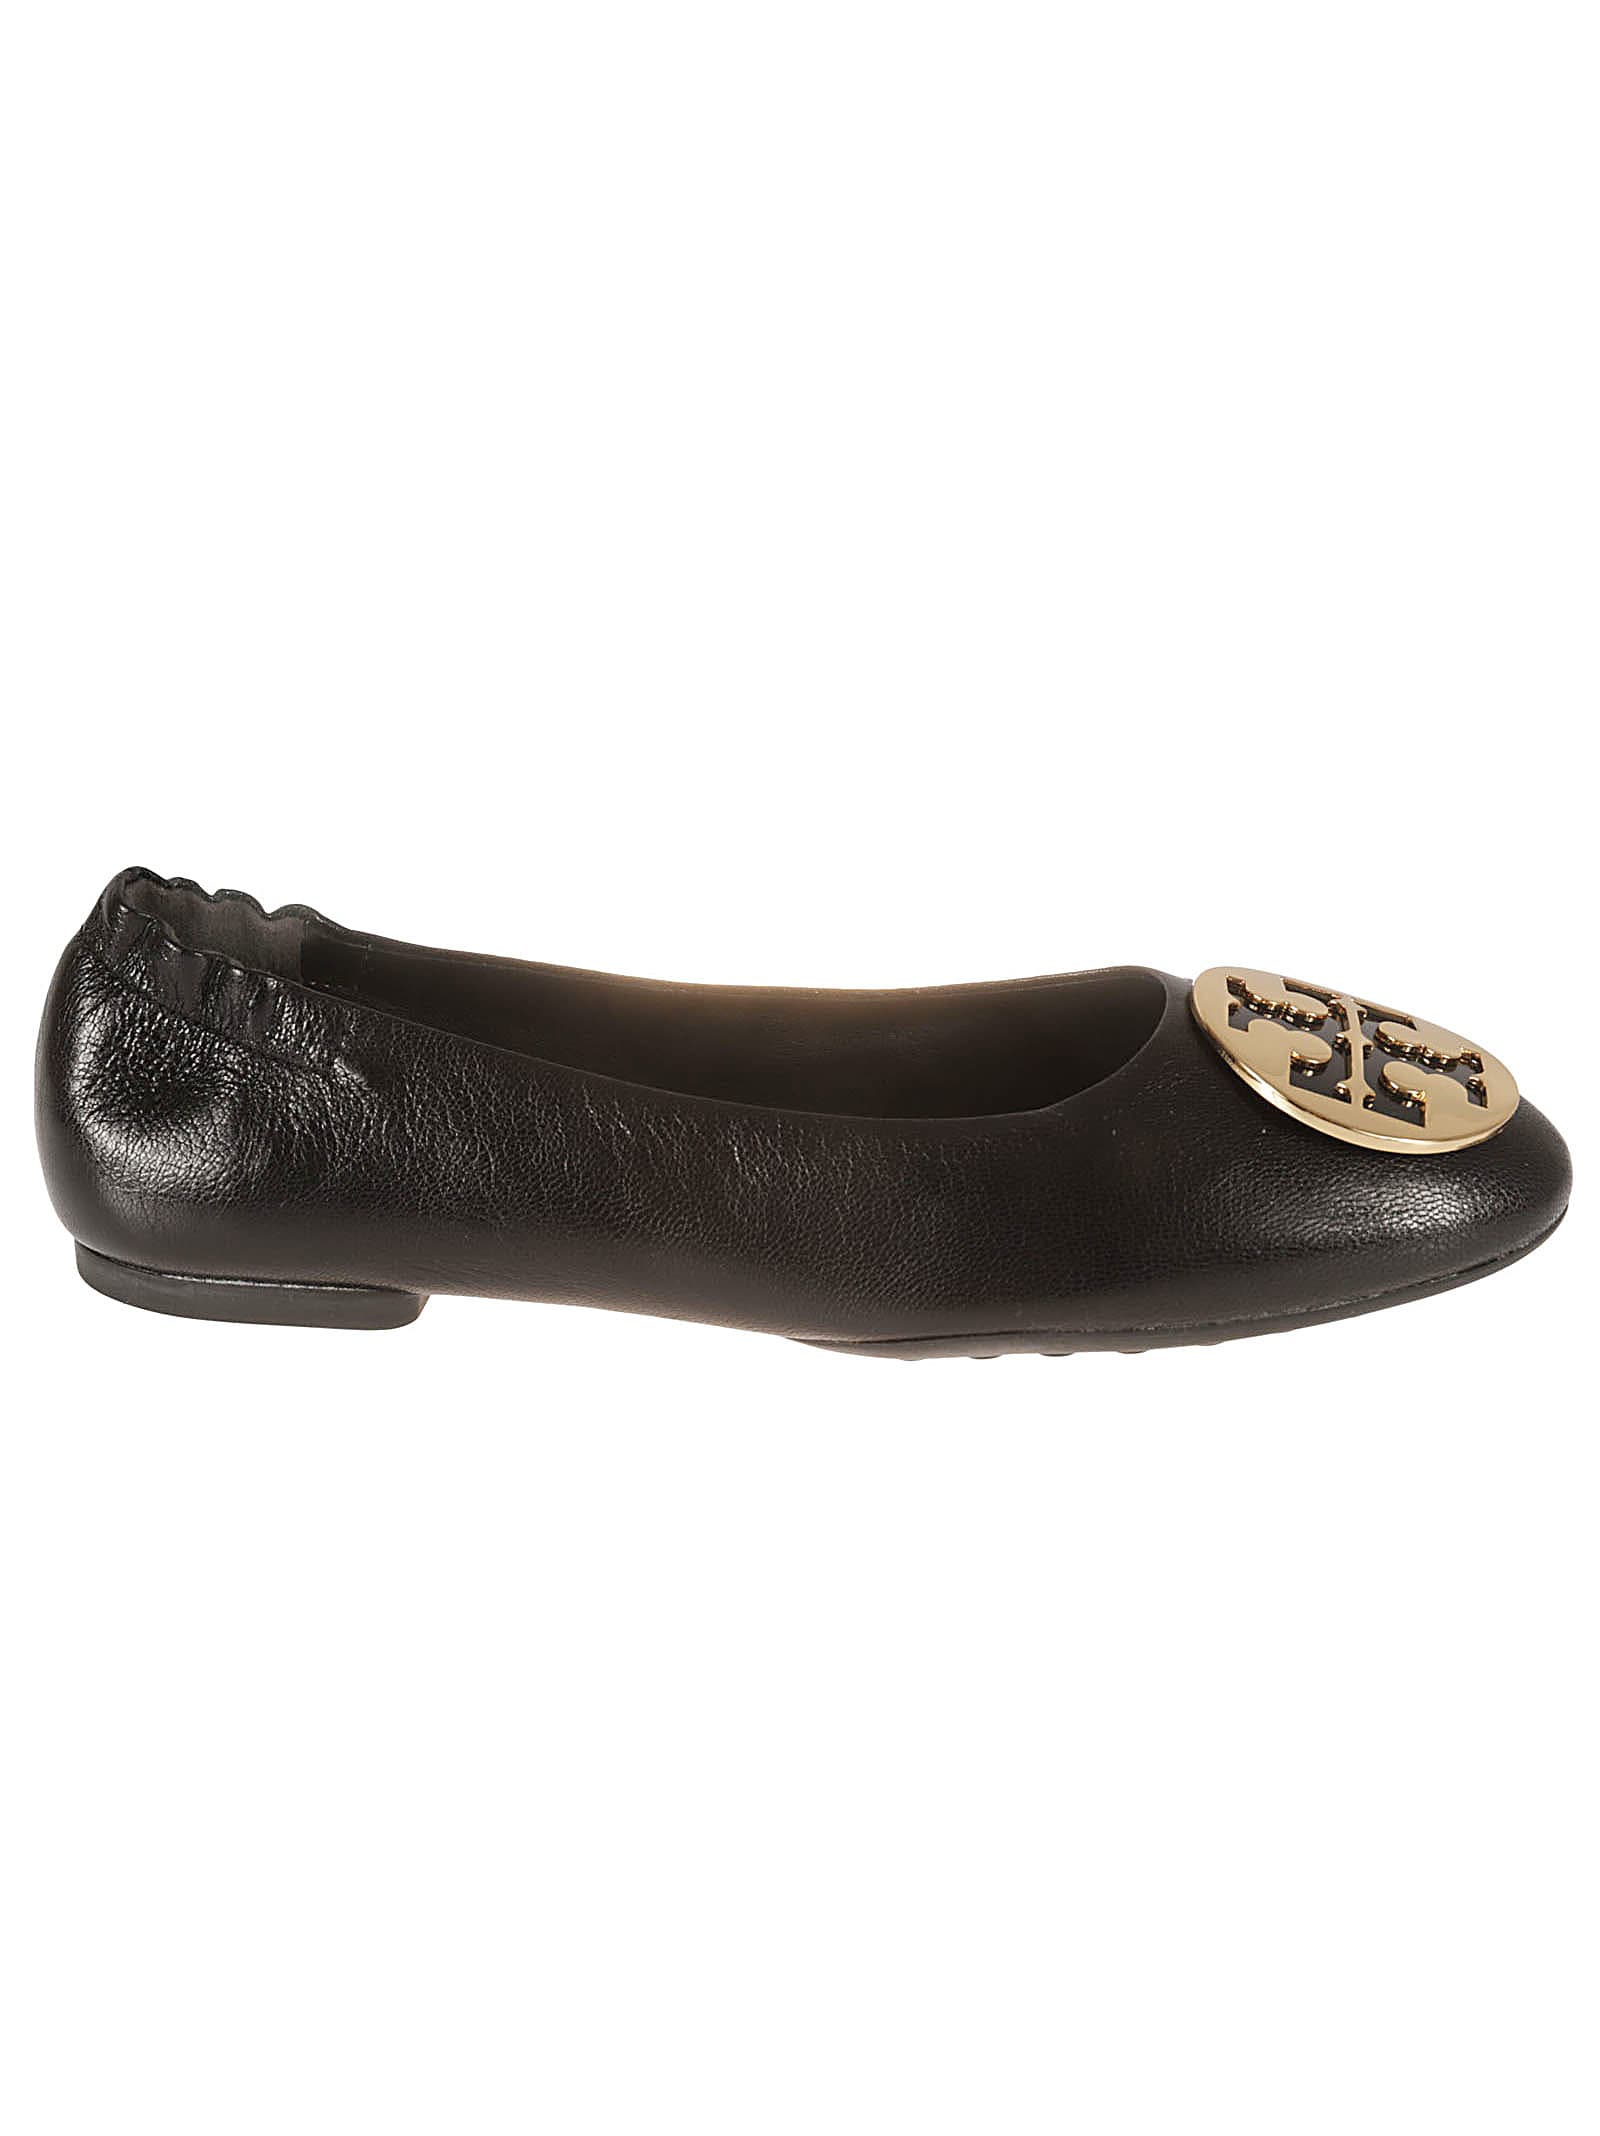 Tory Burch Claire Ballerinas In Perfect Black